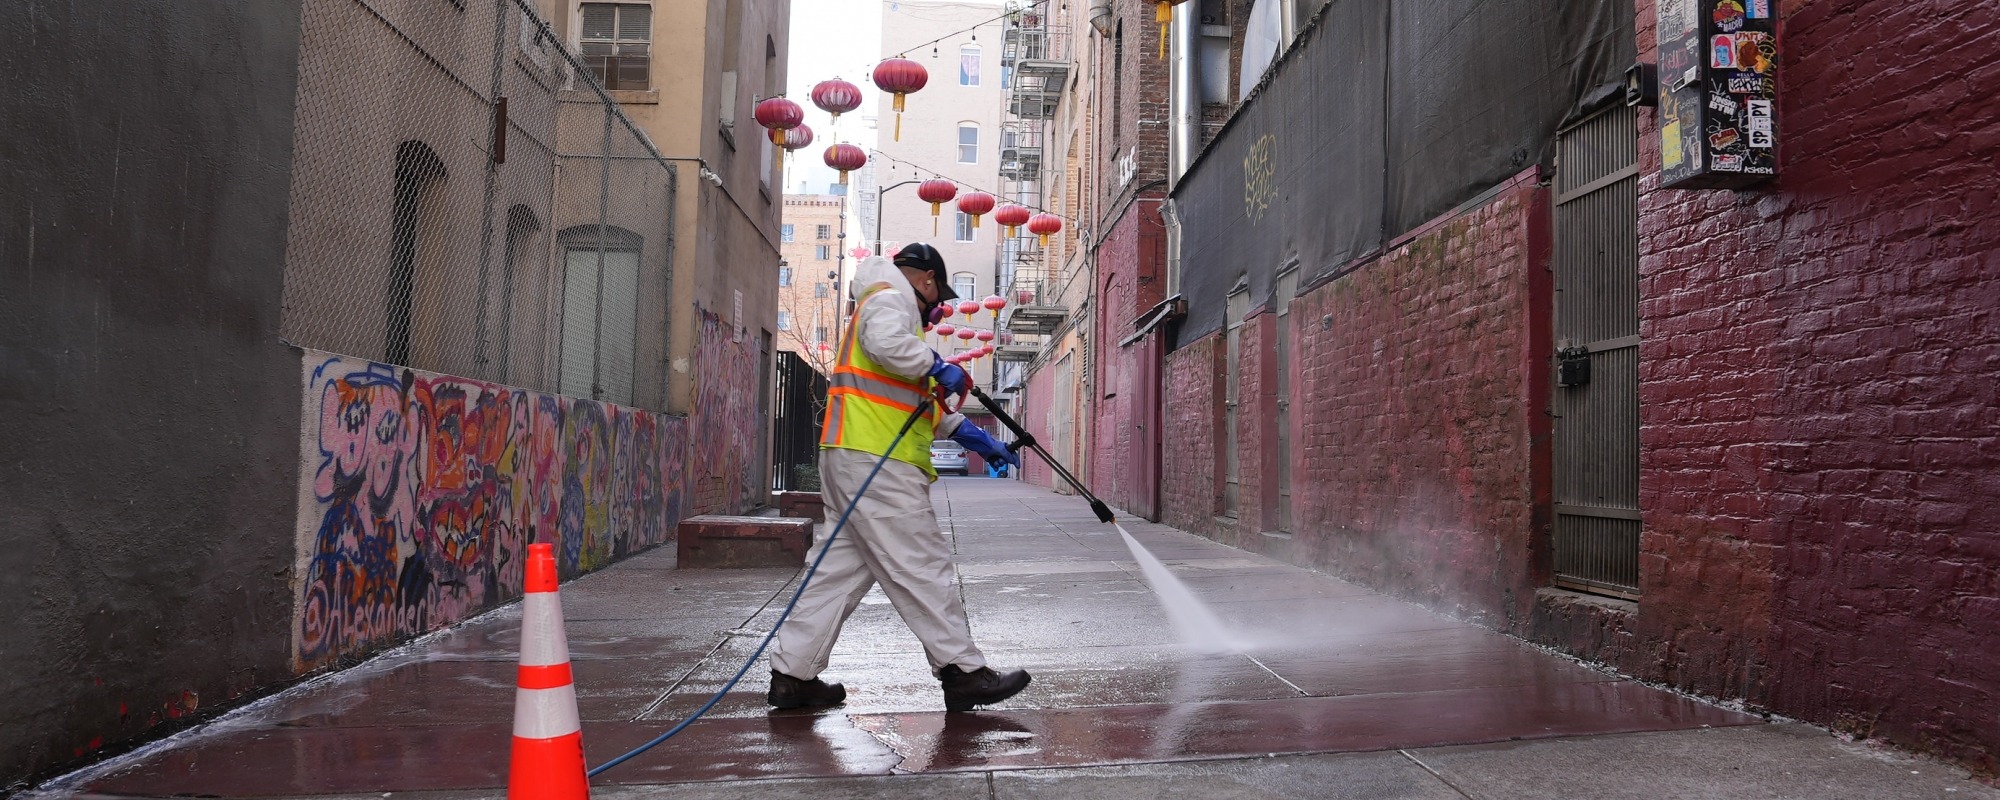 Cleaning crew member steam cleaning an alleyway in Chinatown